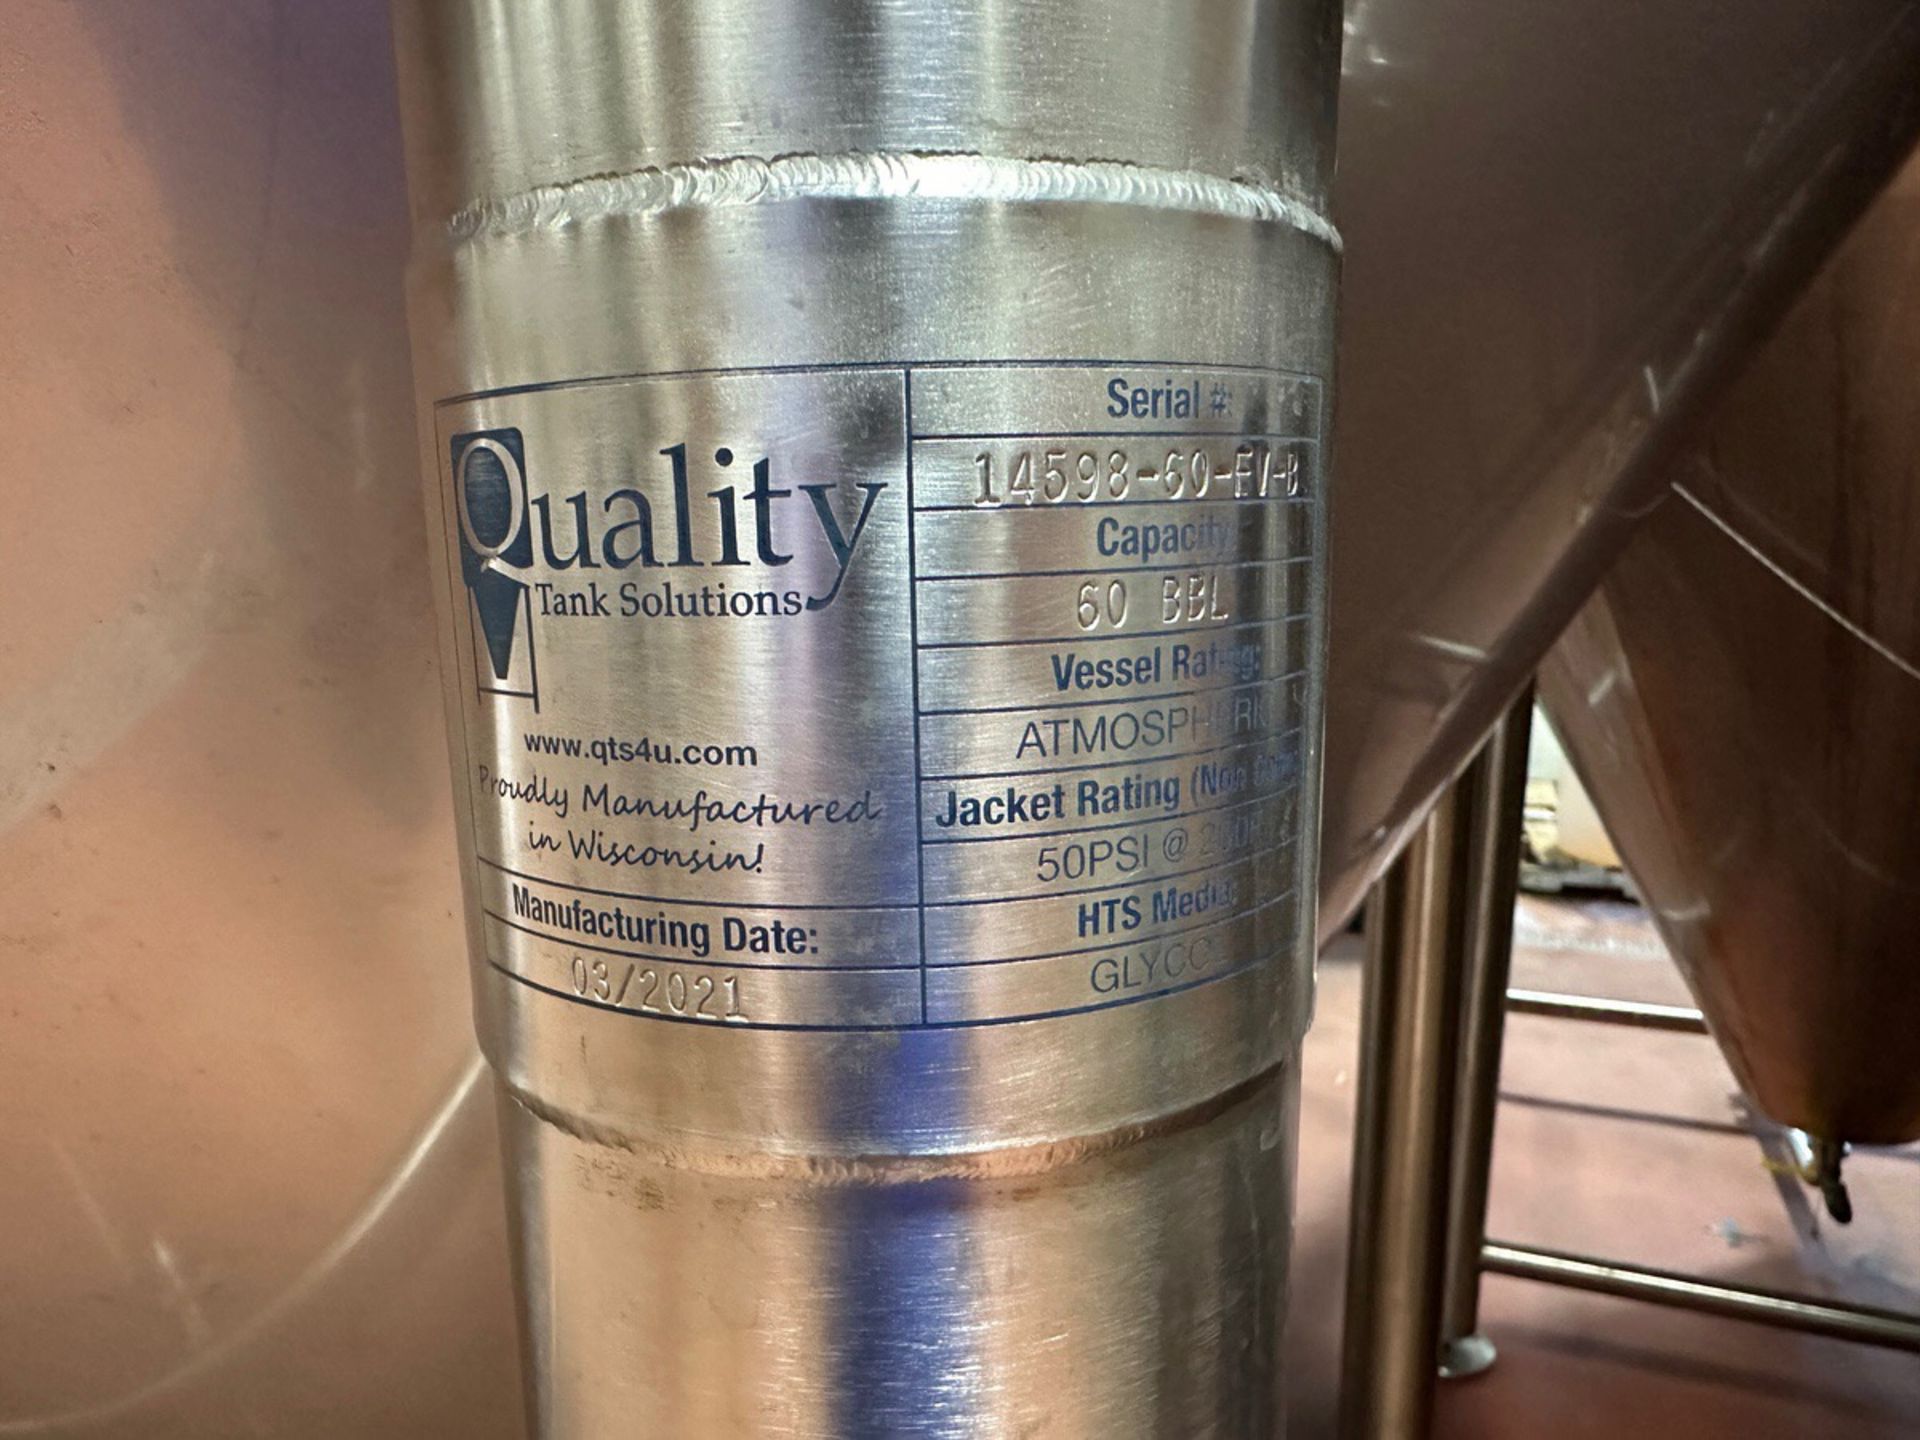 2021 Quality Tank Solutions 60 BBL Fermentation Tank - Cone Bottom, Glycol Jacketed | Rig Fee $1650 - Image 3 of 3